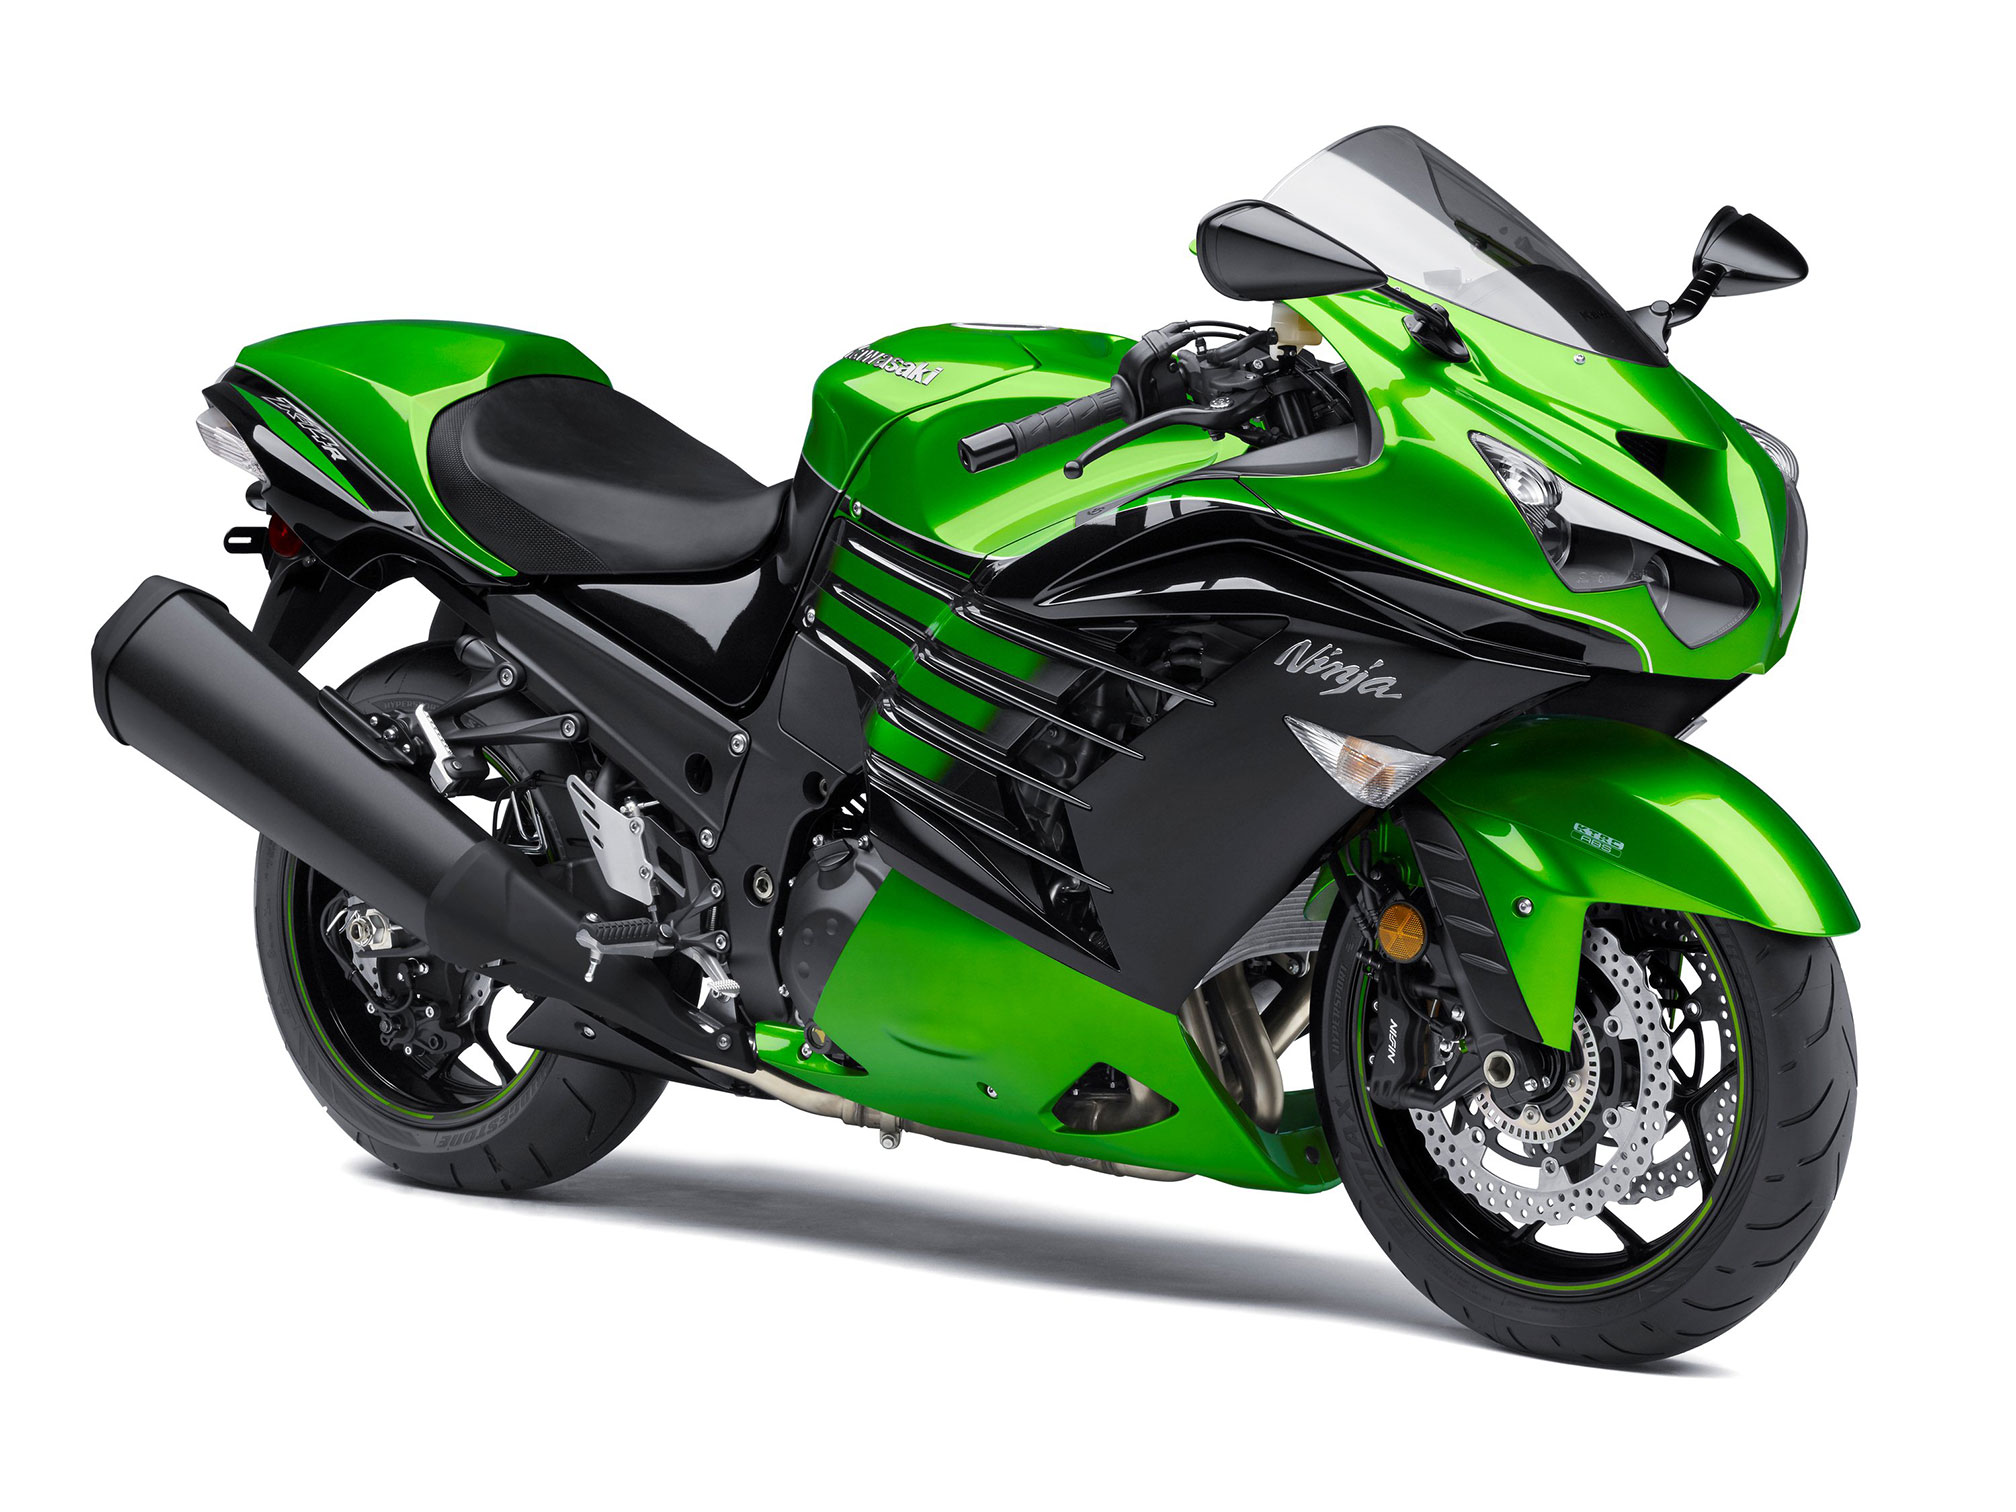 fastest Kawasaki bikes of all time - Motorcycle news, Motorcycle reviews from Malaysia, and the world - BikesRepublic.com